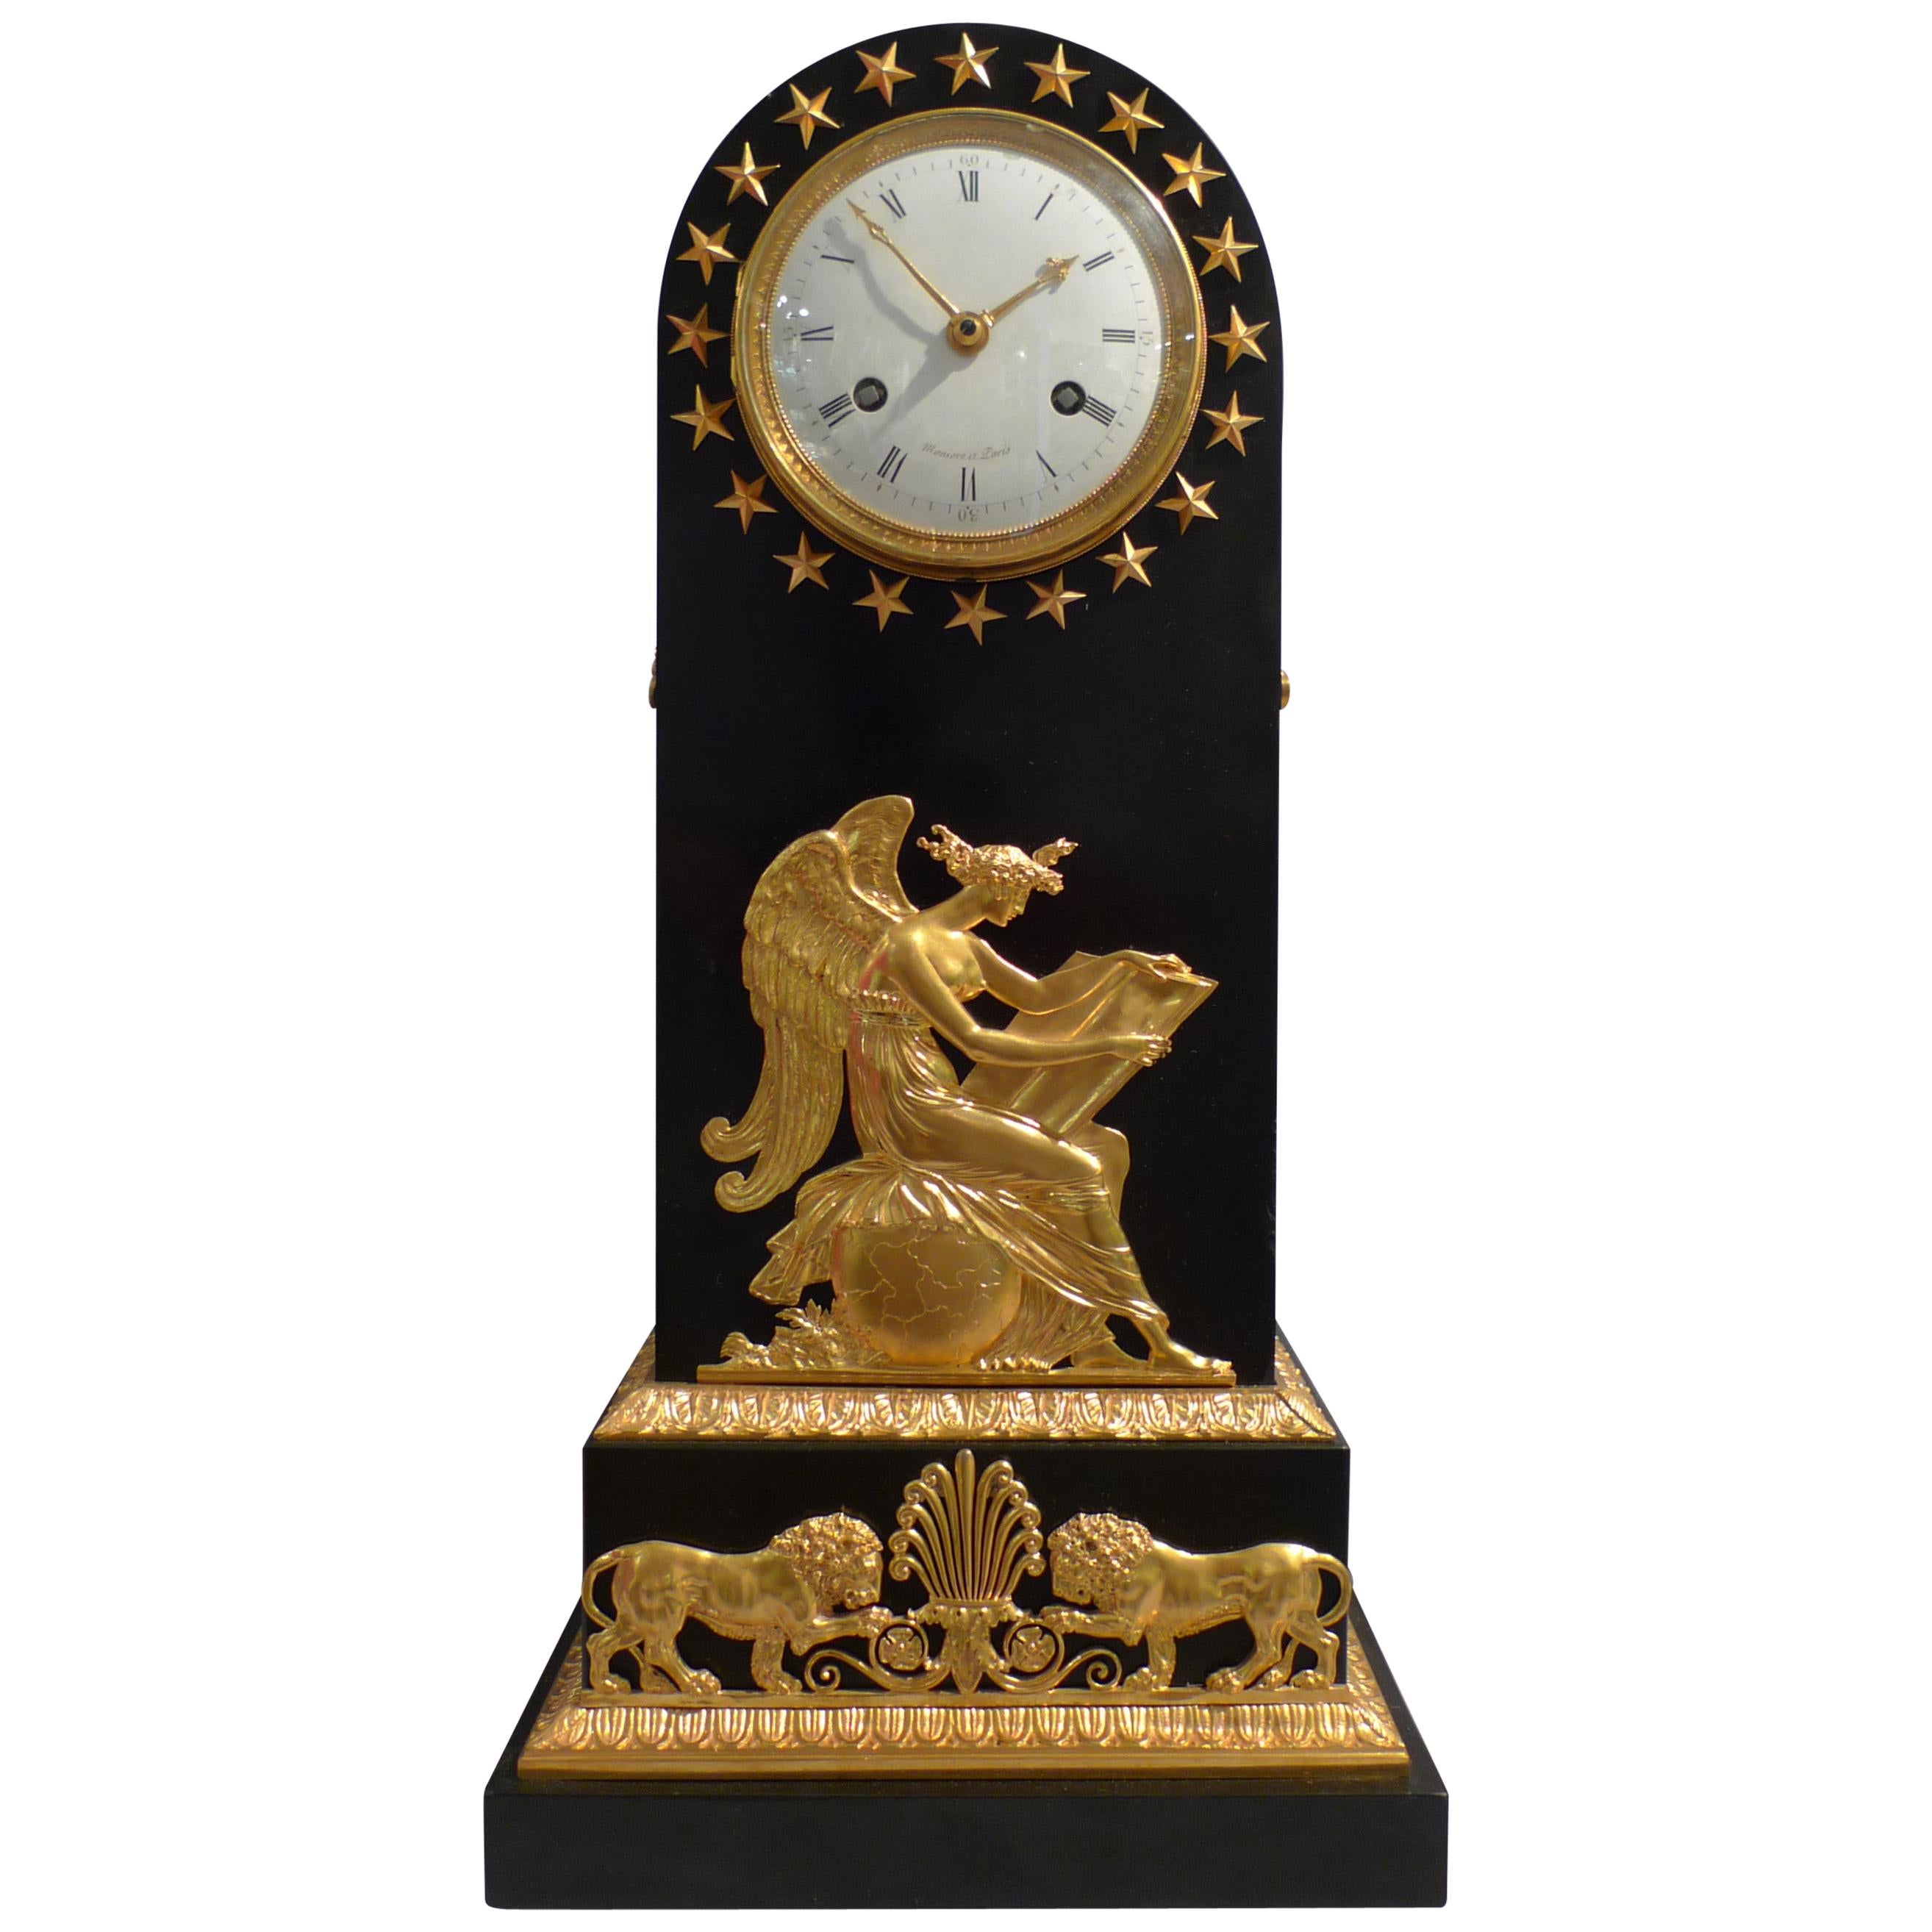 French Empire Antique Black Marble and Ormolu Borne Clock by Maniere